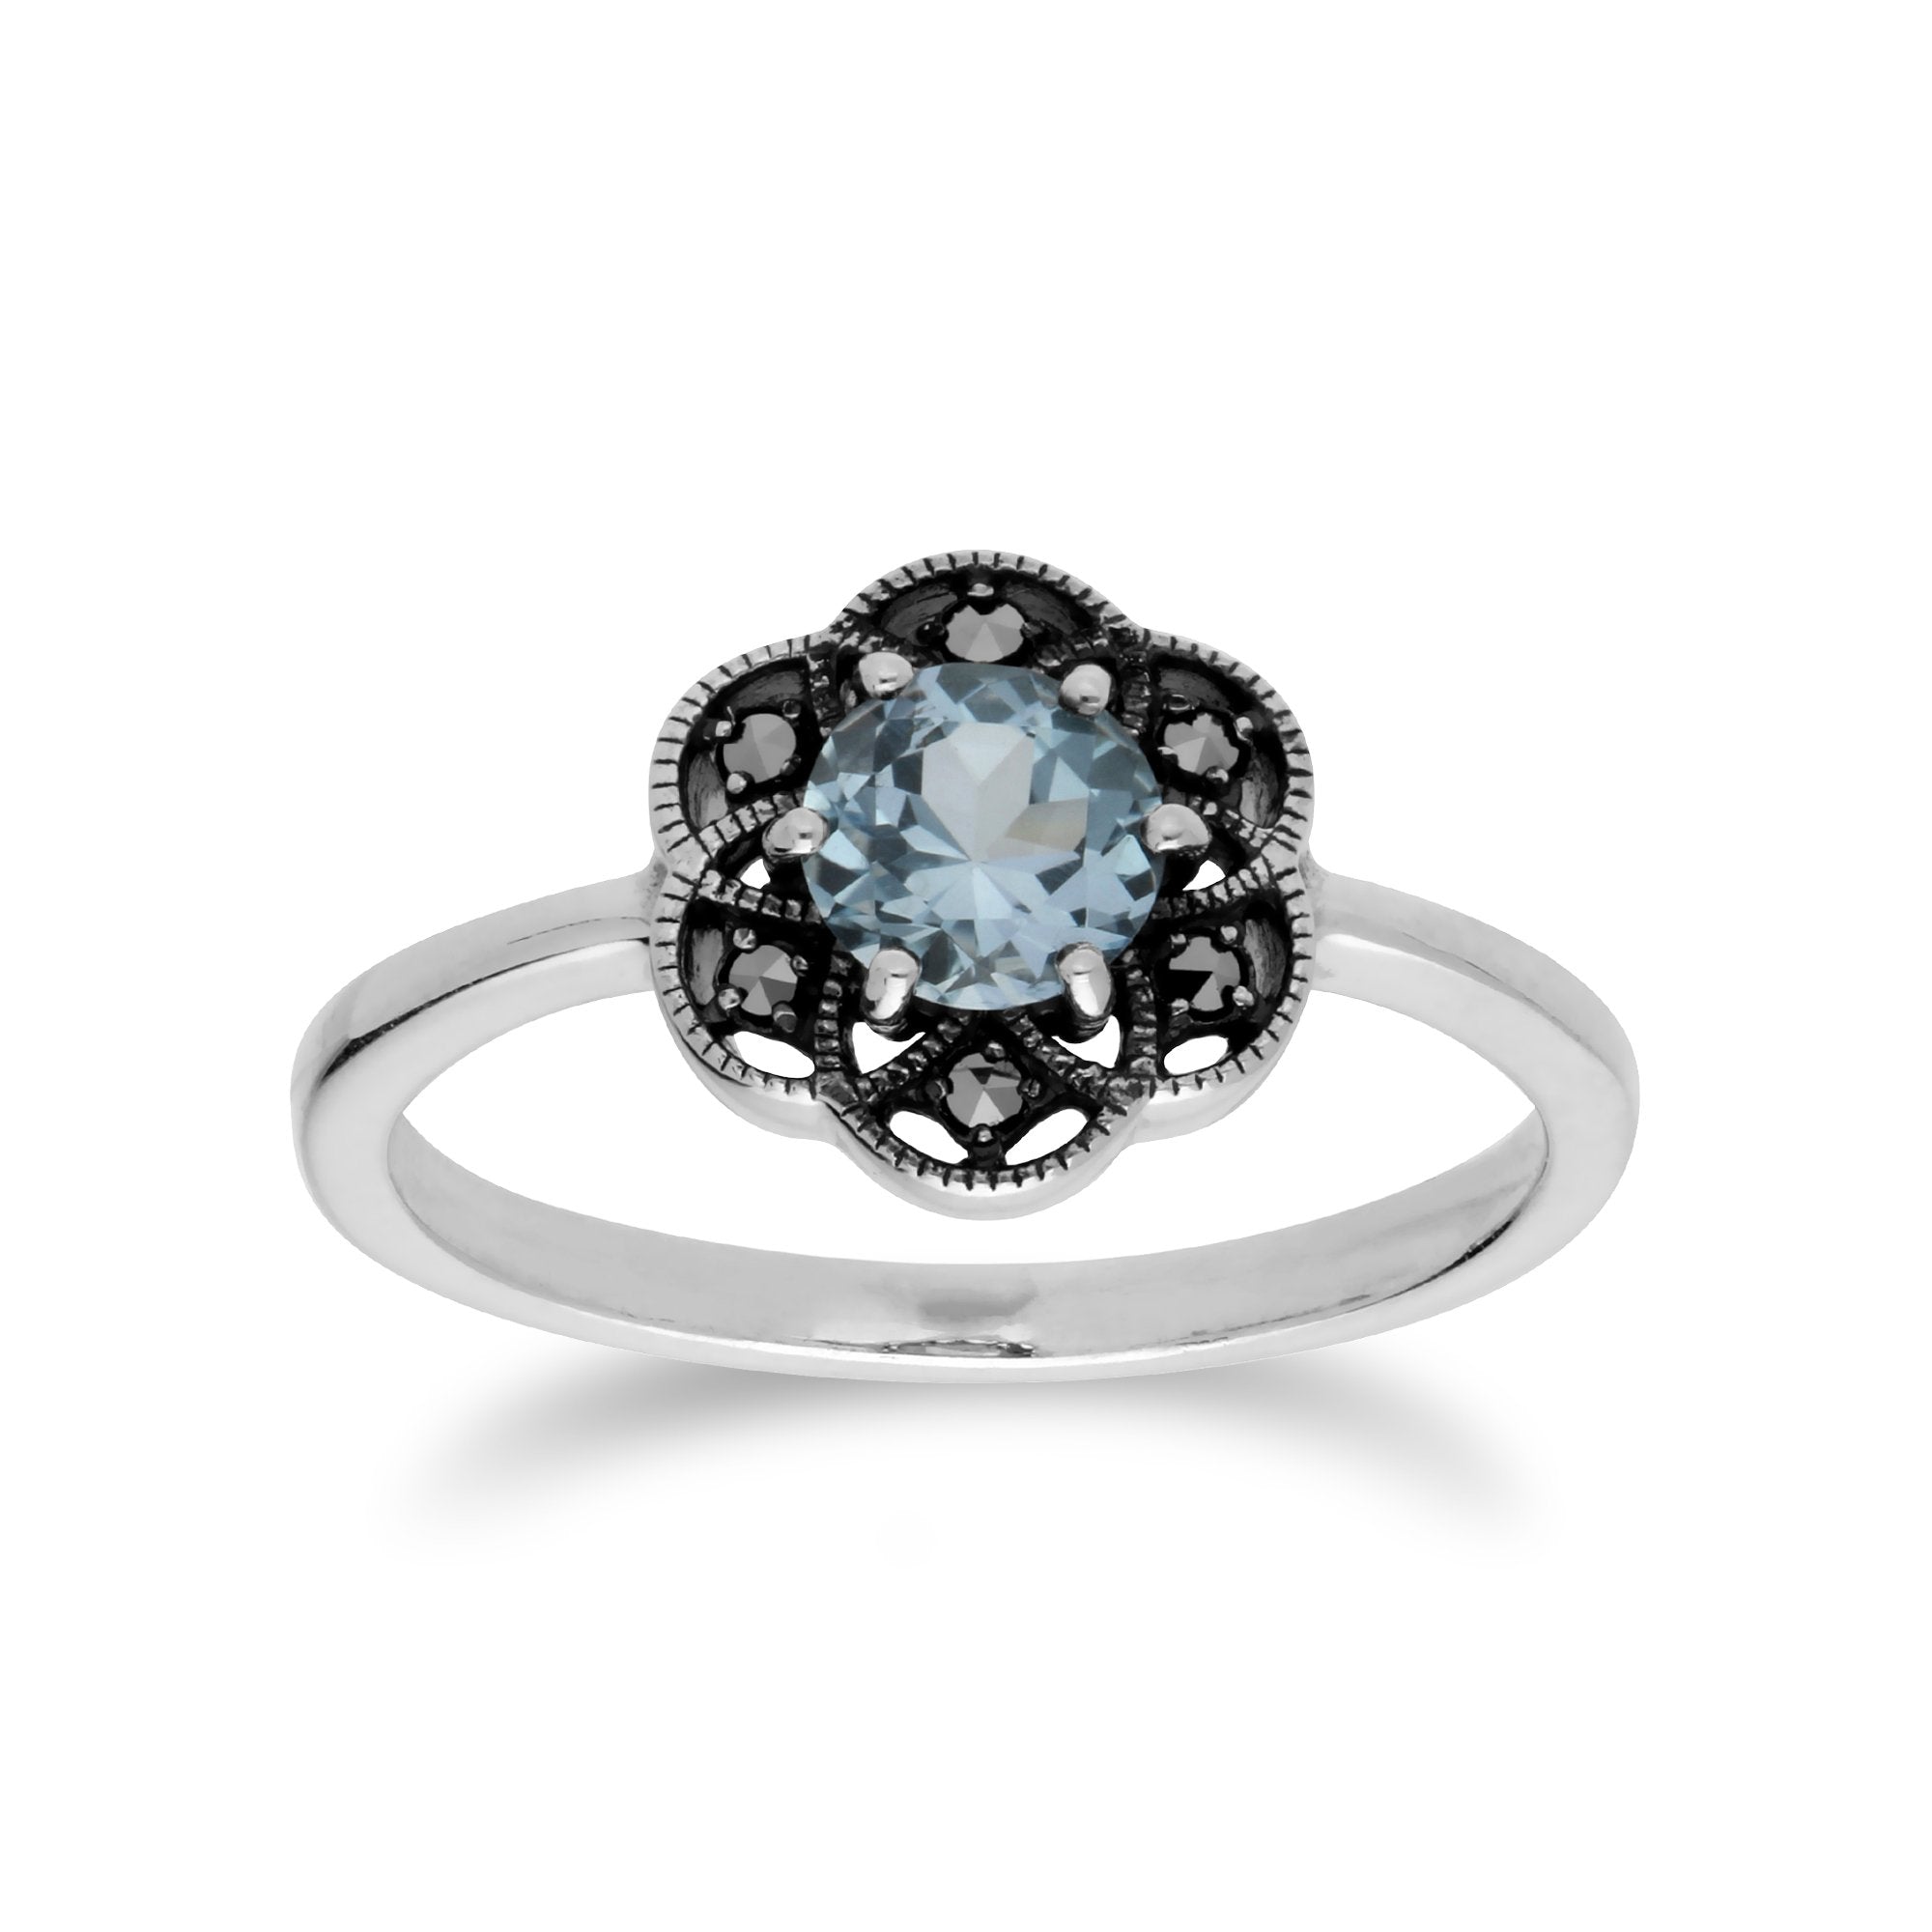 Floral Round Blue Topaz & Marcasite Daisy Ring in 925 Sterling Silver